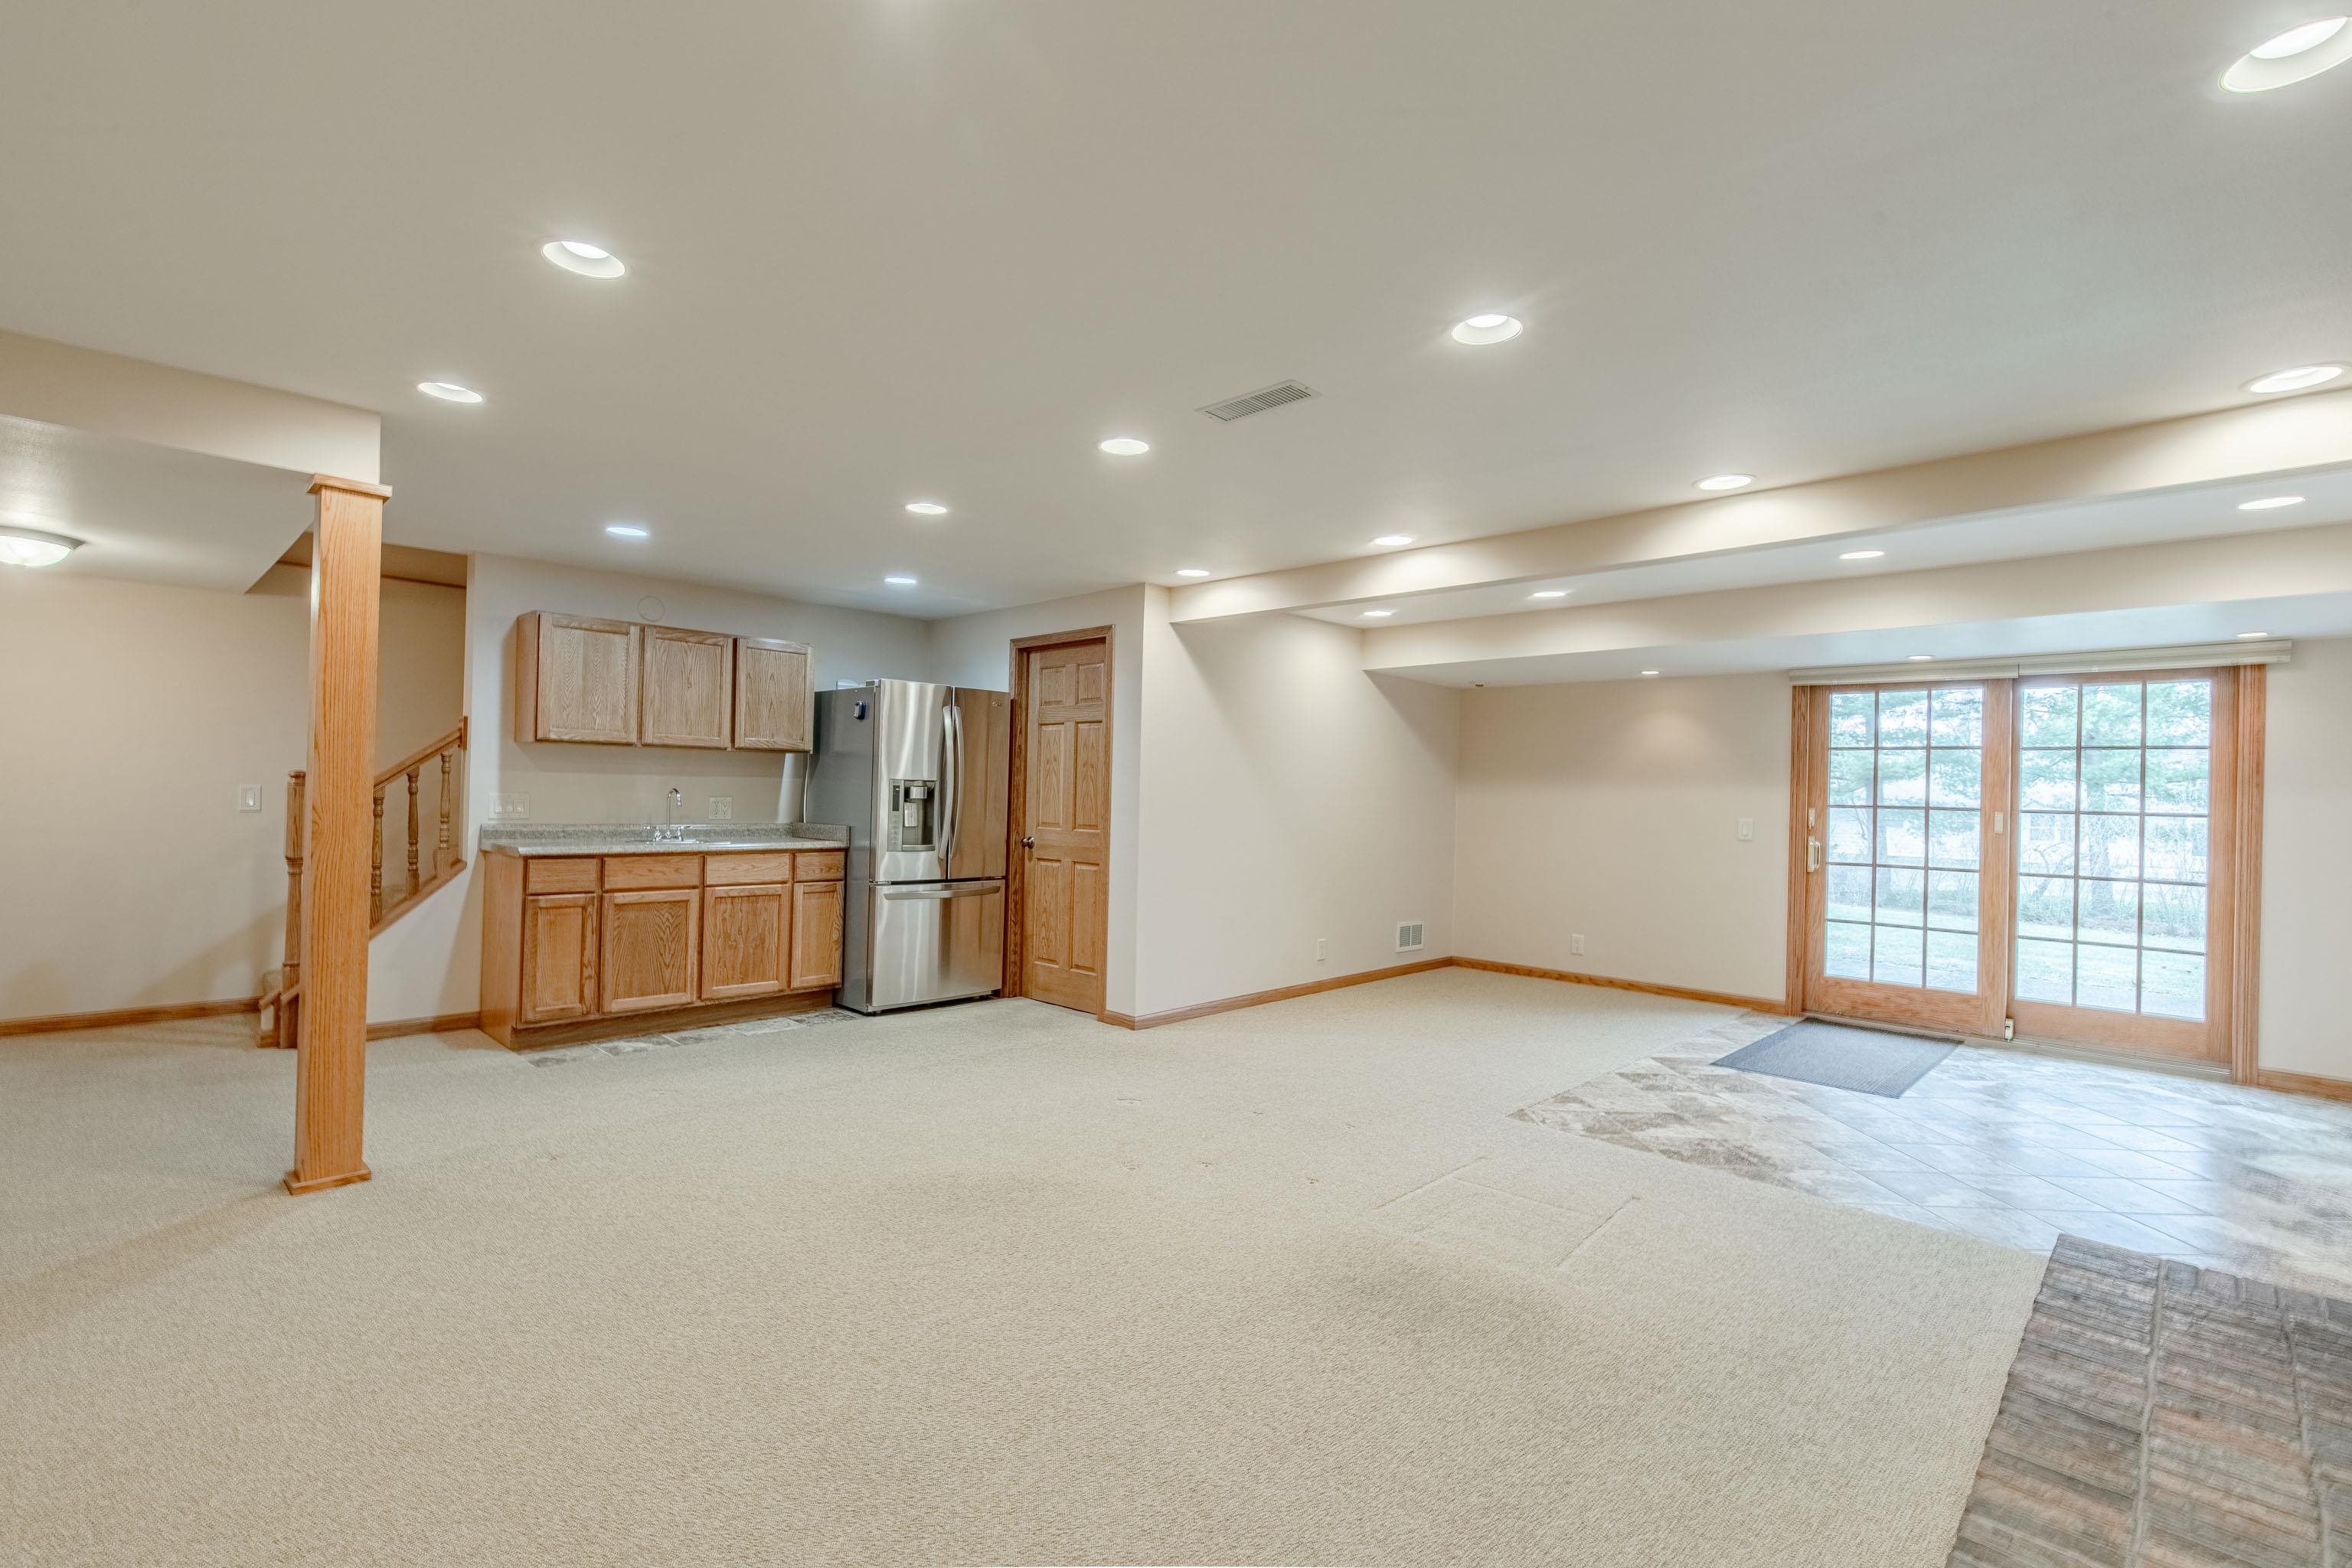 Photo -38 - 5744 Lacy Road Fitchburg, WI 53711